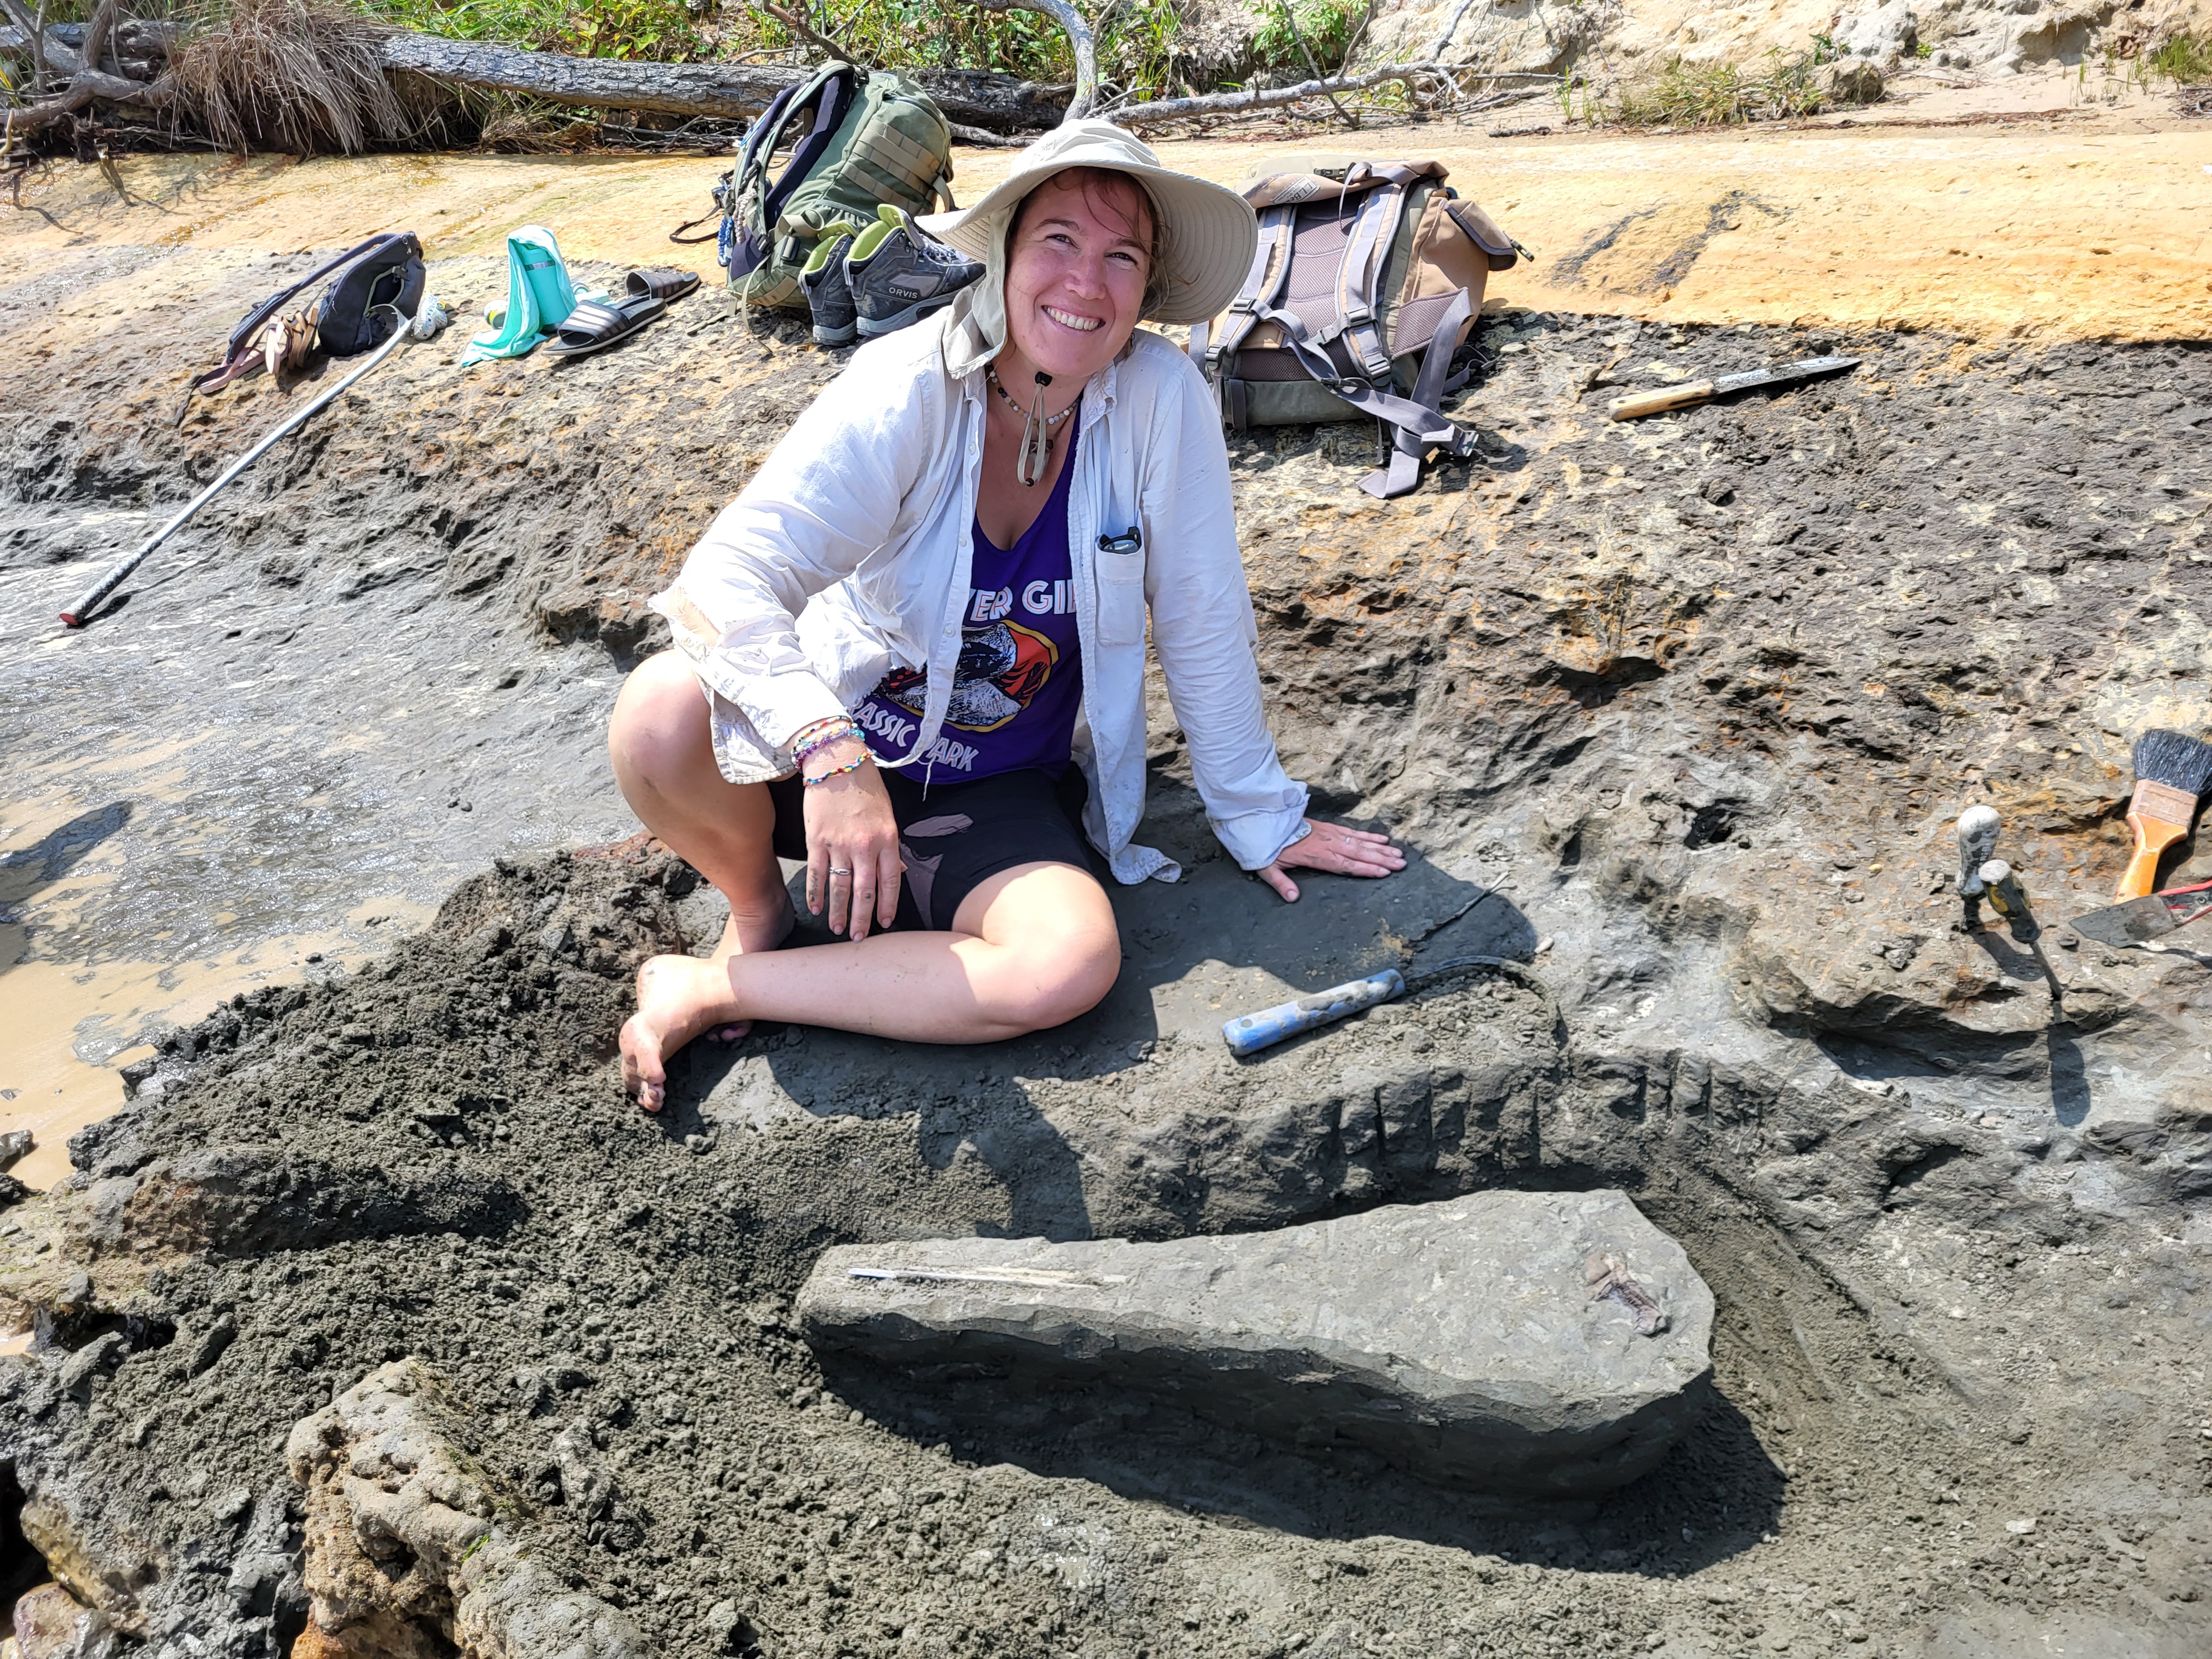 A smiling woman in a white shirt and hat sits on a beach with a partially excavated fossil nearby. Next to the fossil is a CobraHead Weeder.